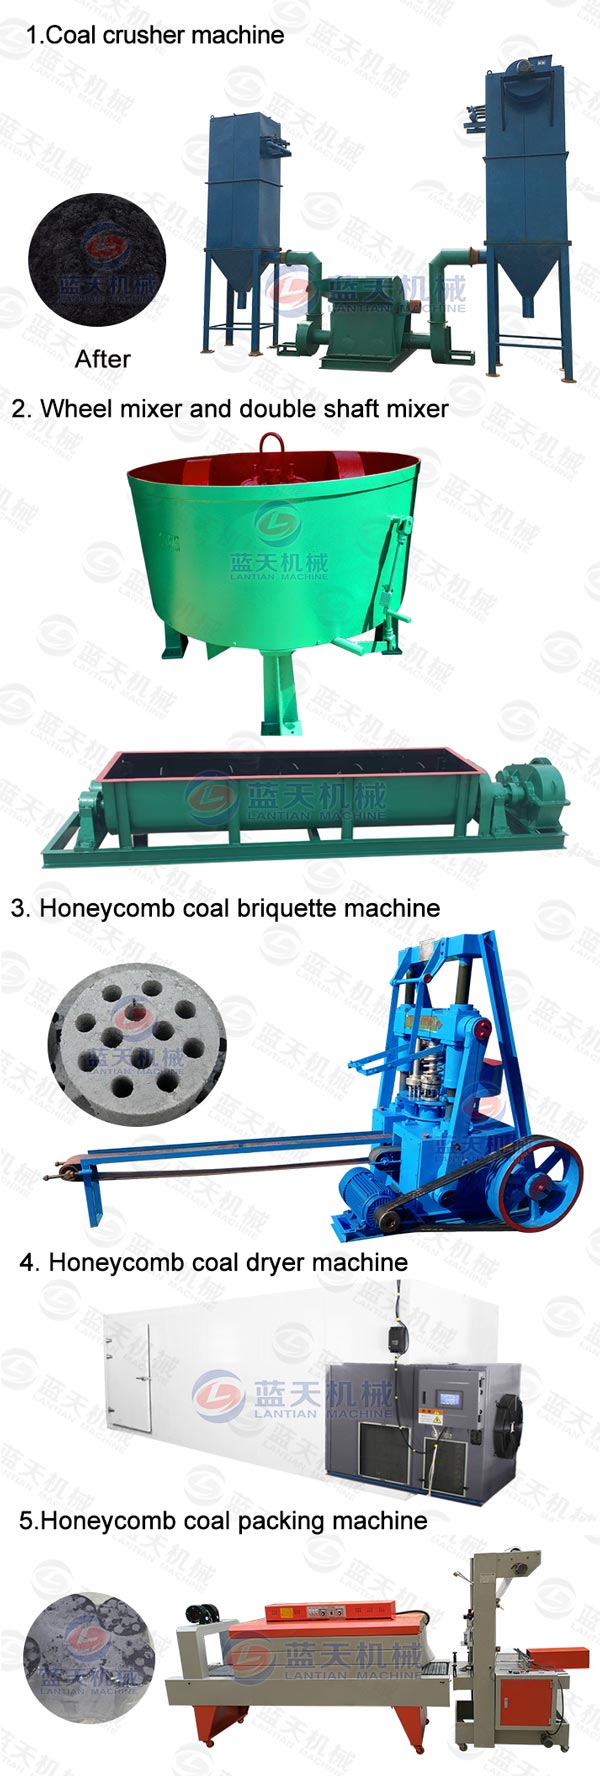 Product line of honeycomb coal packaging machine